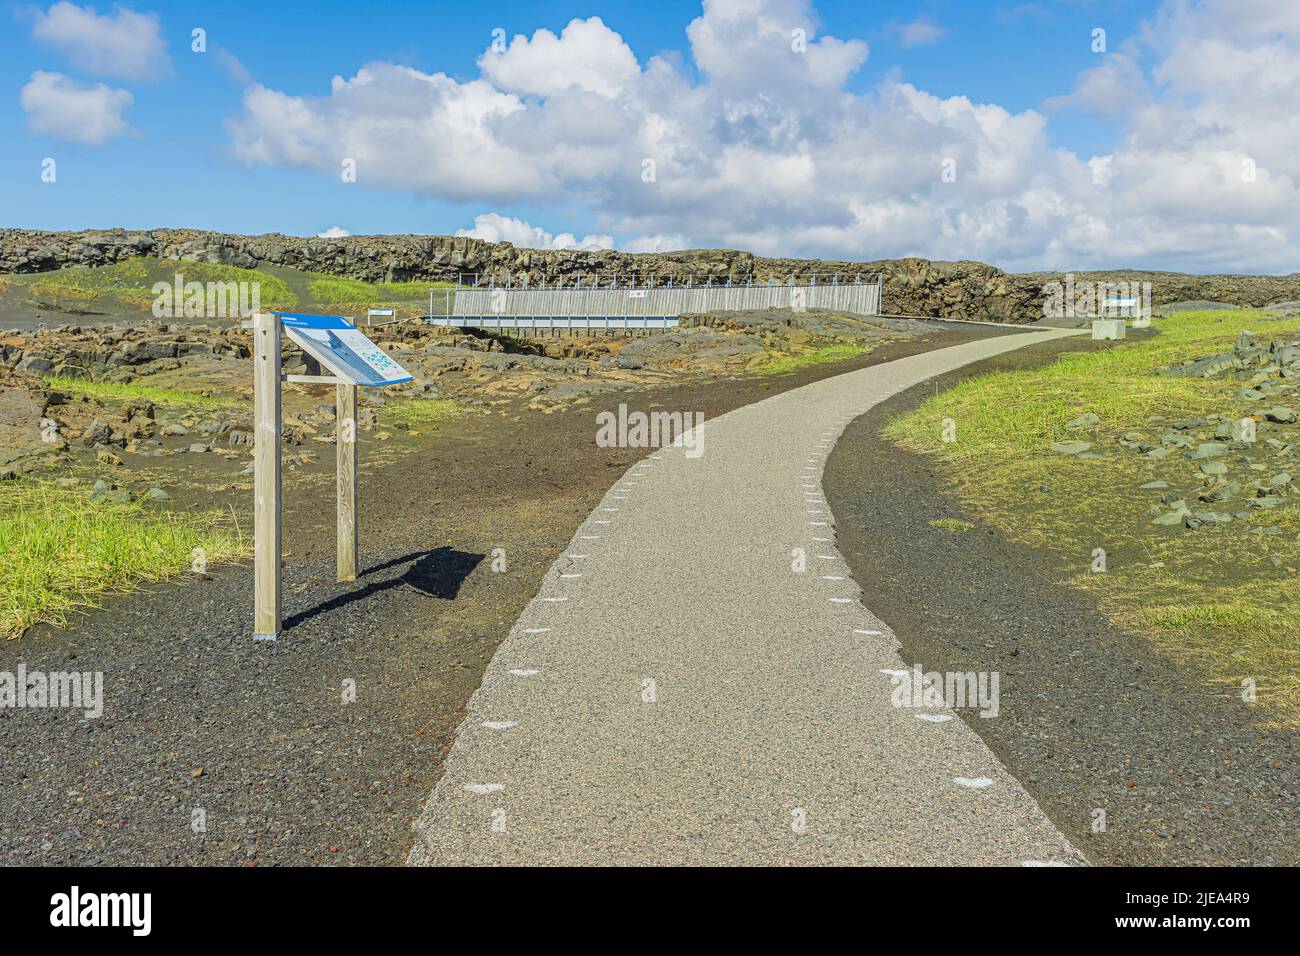 Pathway with a sign pointing to a metal bridge on the Reykjanes Peninsula of Iceland. Lava rocks and sand with green grass between the American and Eu Stock Photo